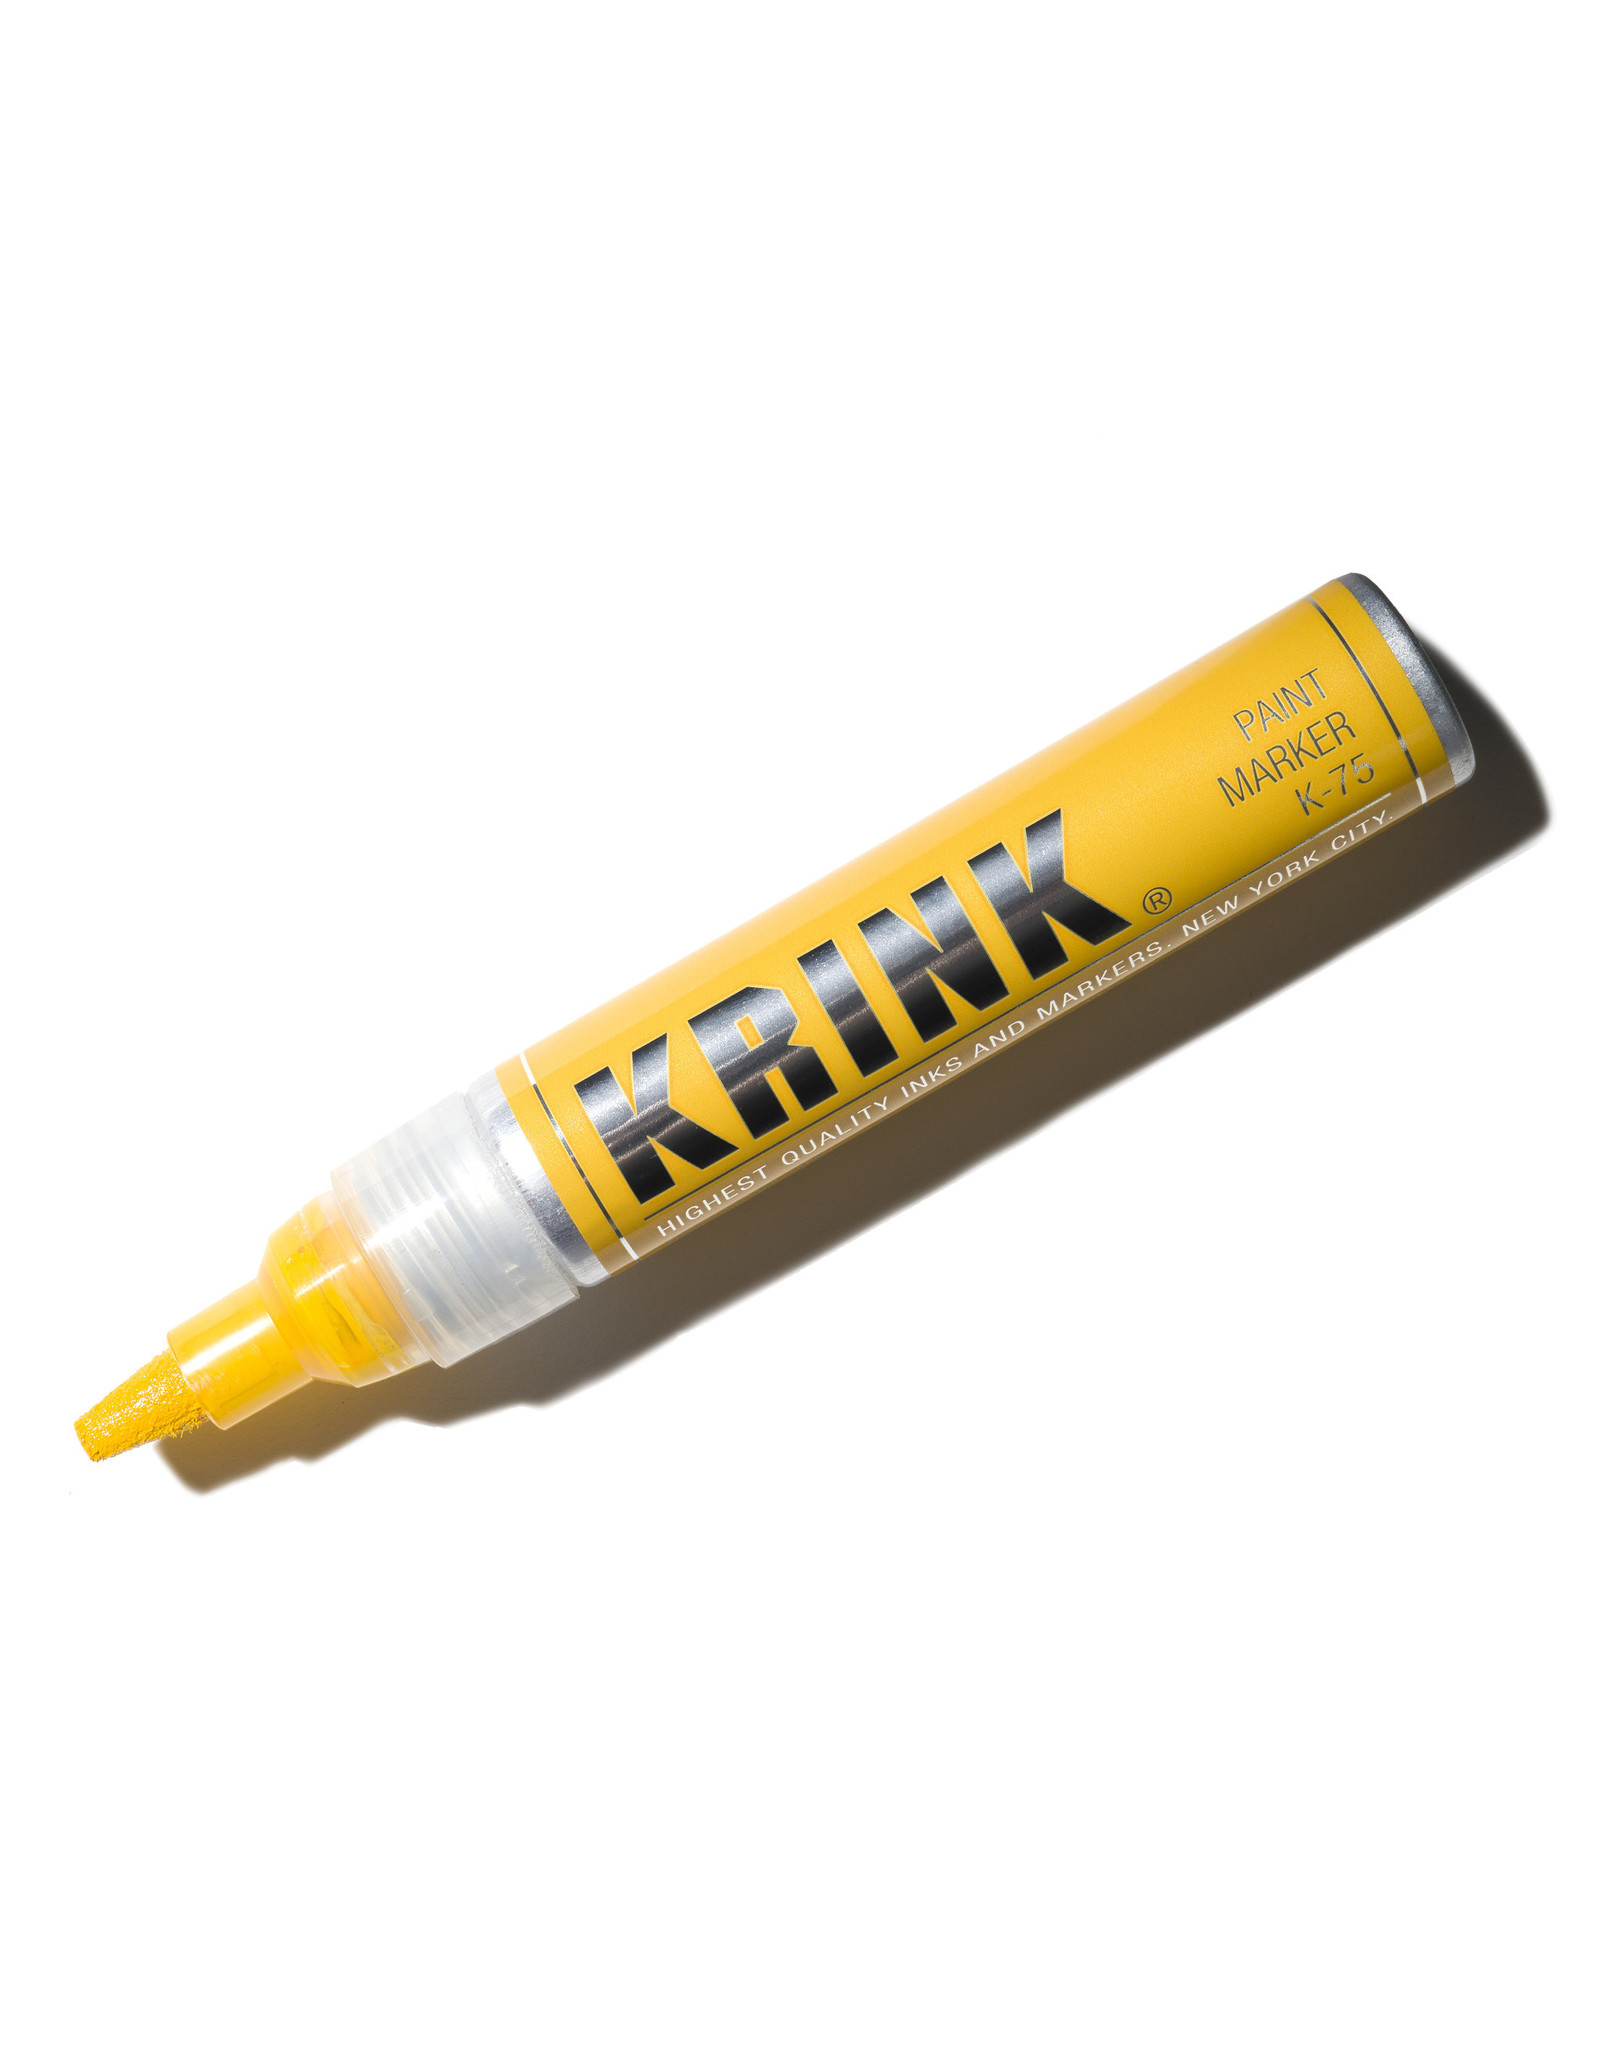 Krink Krink K-75 Alcohol Paint Marker, Yellow